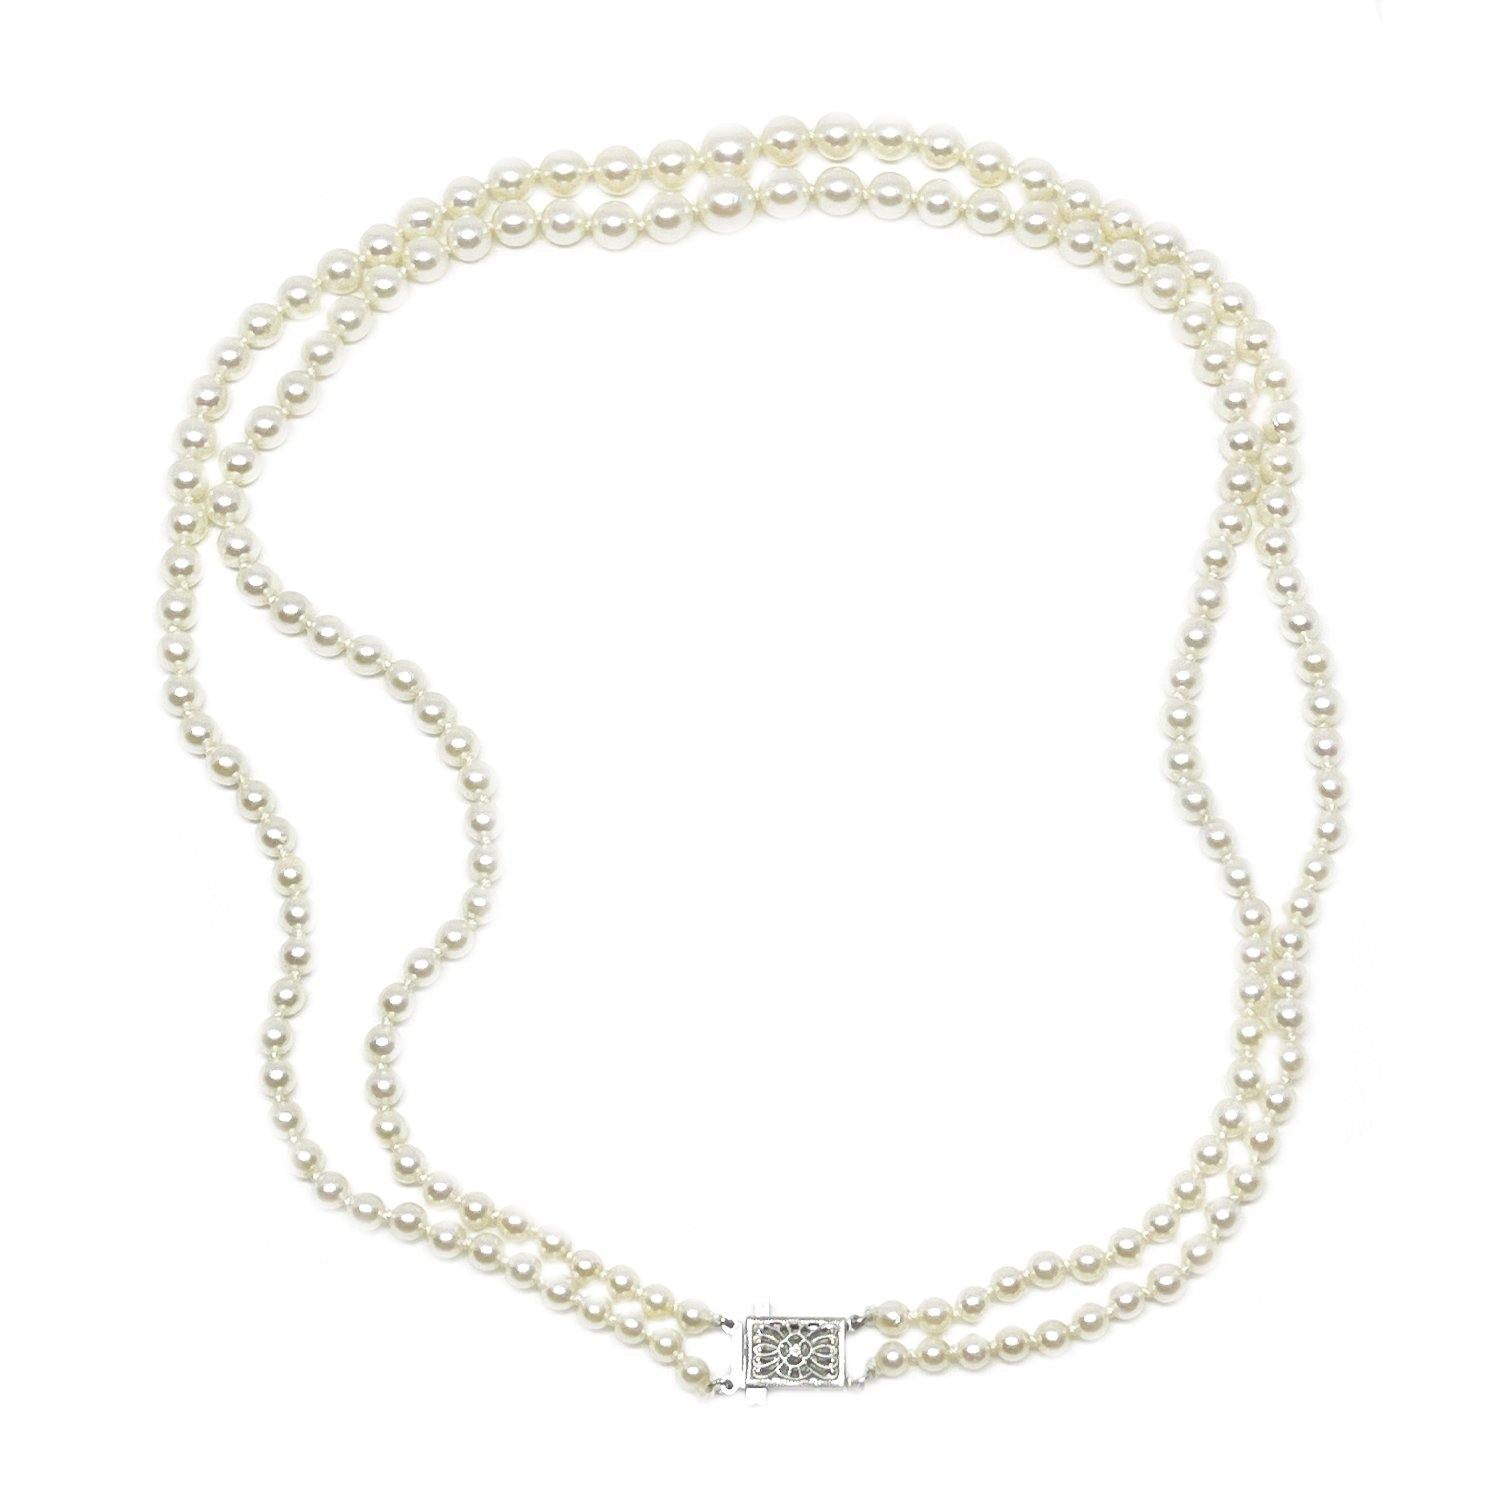 Filigree Double Strand Japanese Saltwater Cultured Akoya Pearl